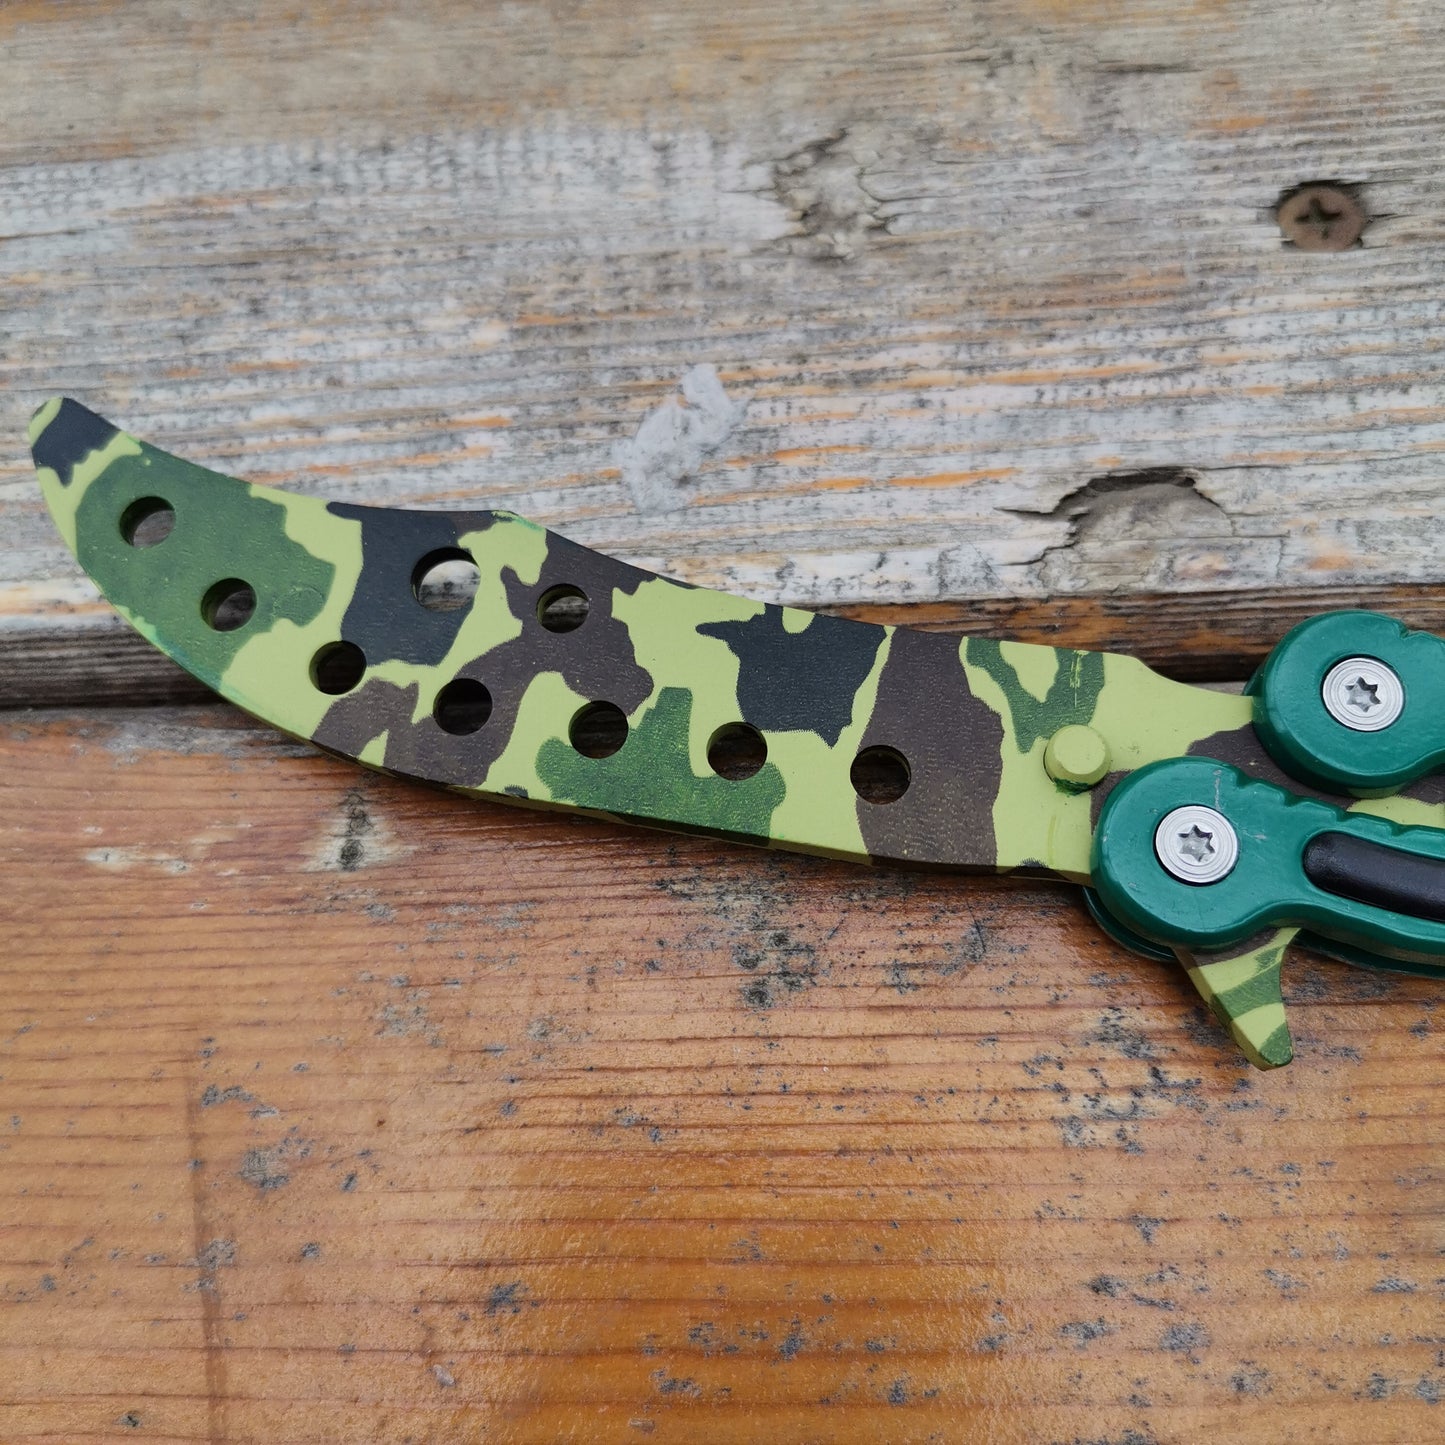 Global Offensive Balisong Trainer Boreal Forest Replica